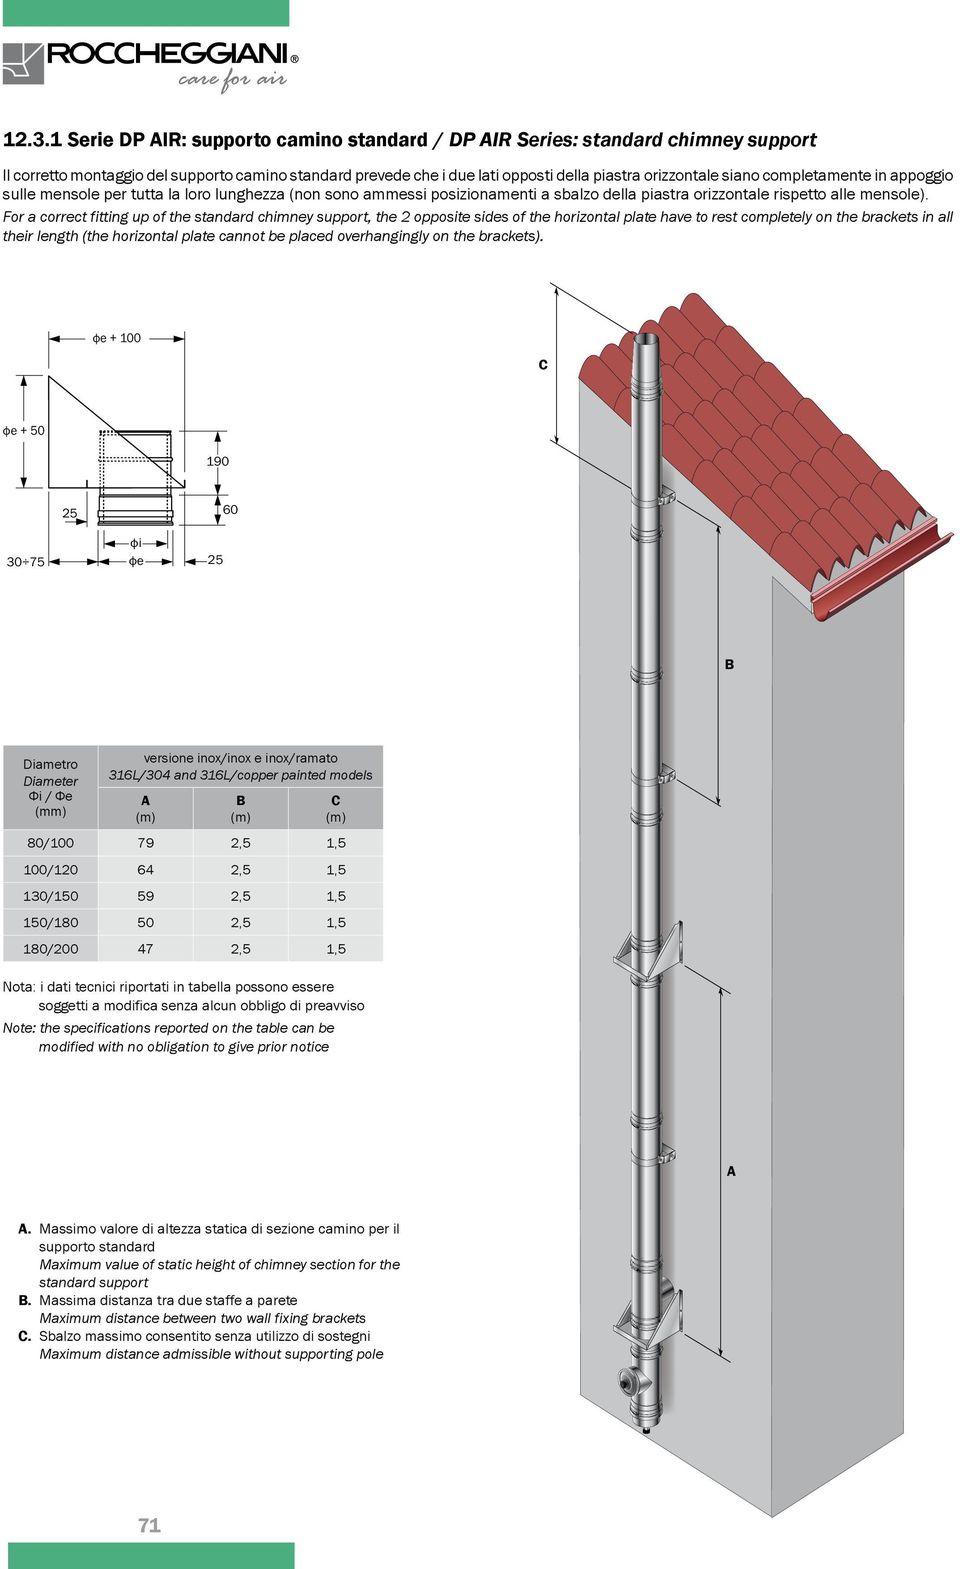 For a correct fitting up of the standard chimney support, the 2 opposite sides of the horizontal plate have to rest completely on the brackets in all their length (the horizontal plate cannot be